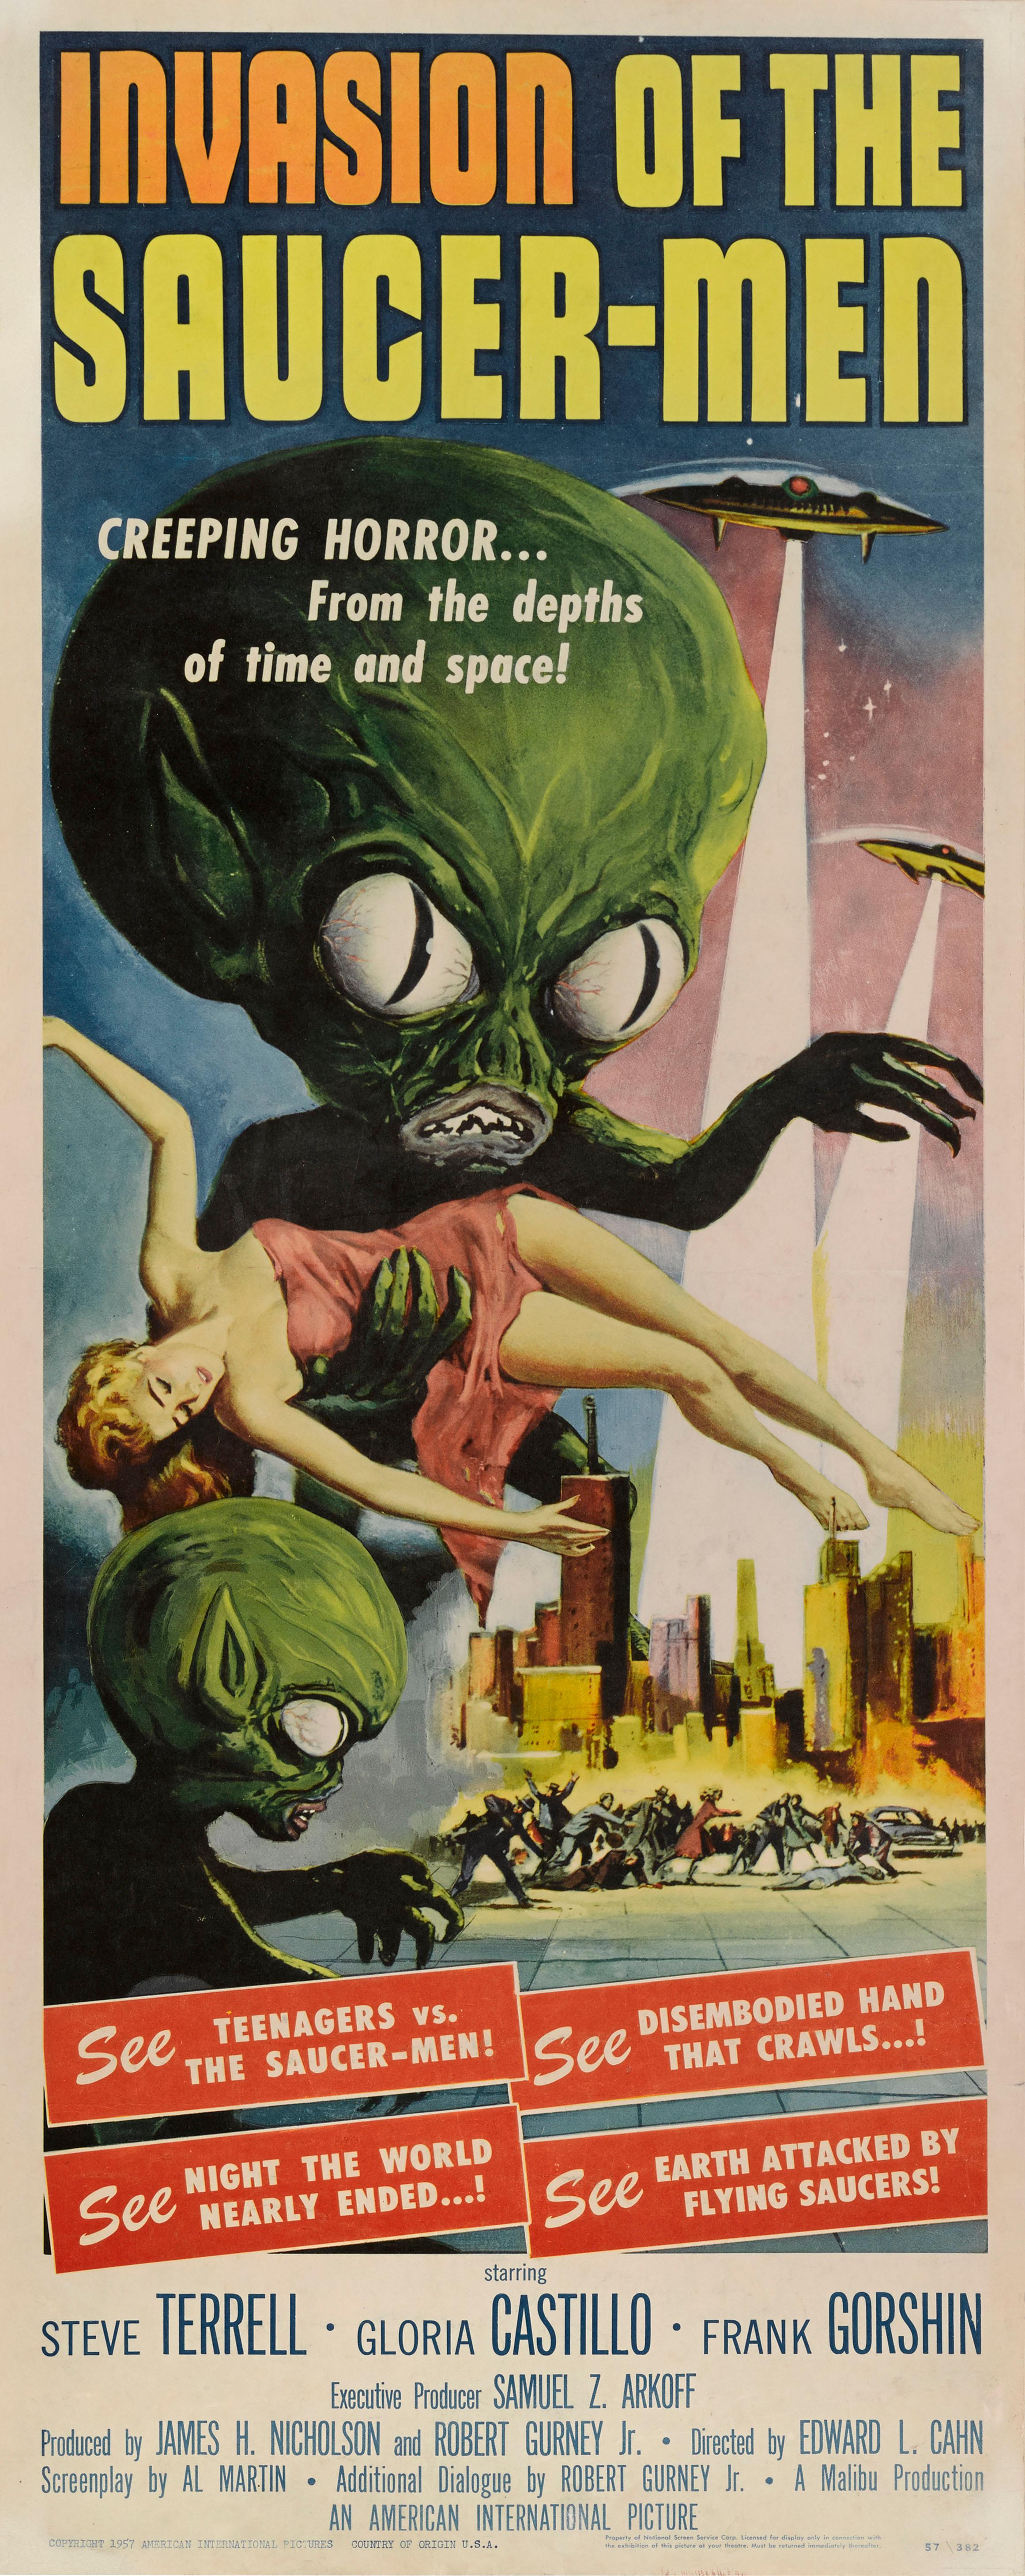 Original US film poster for the 1957 Science fiction movie.
1950s science fiction is populated by monsters and aliens. These fantastic creatures, state of the art in their time, now appear strangely dated, especially on the screen where their